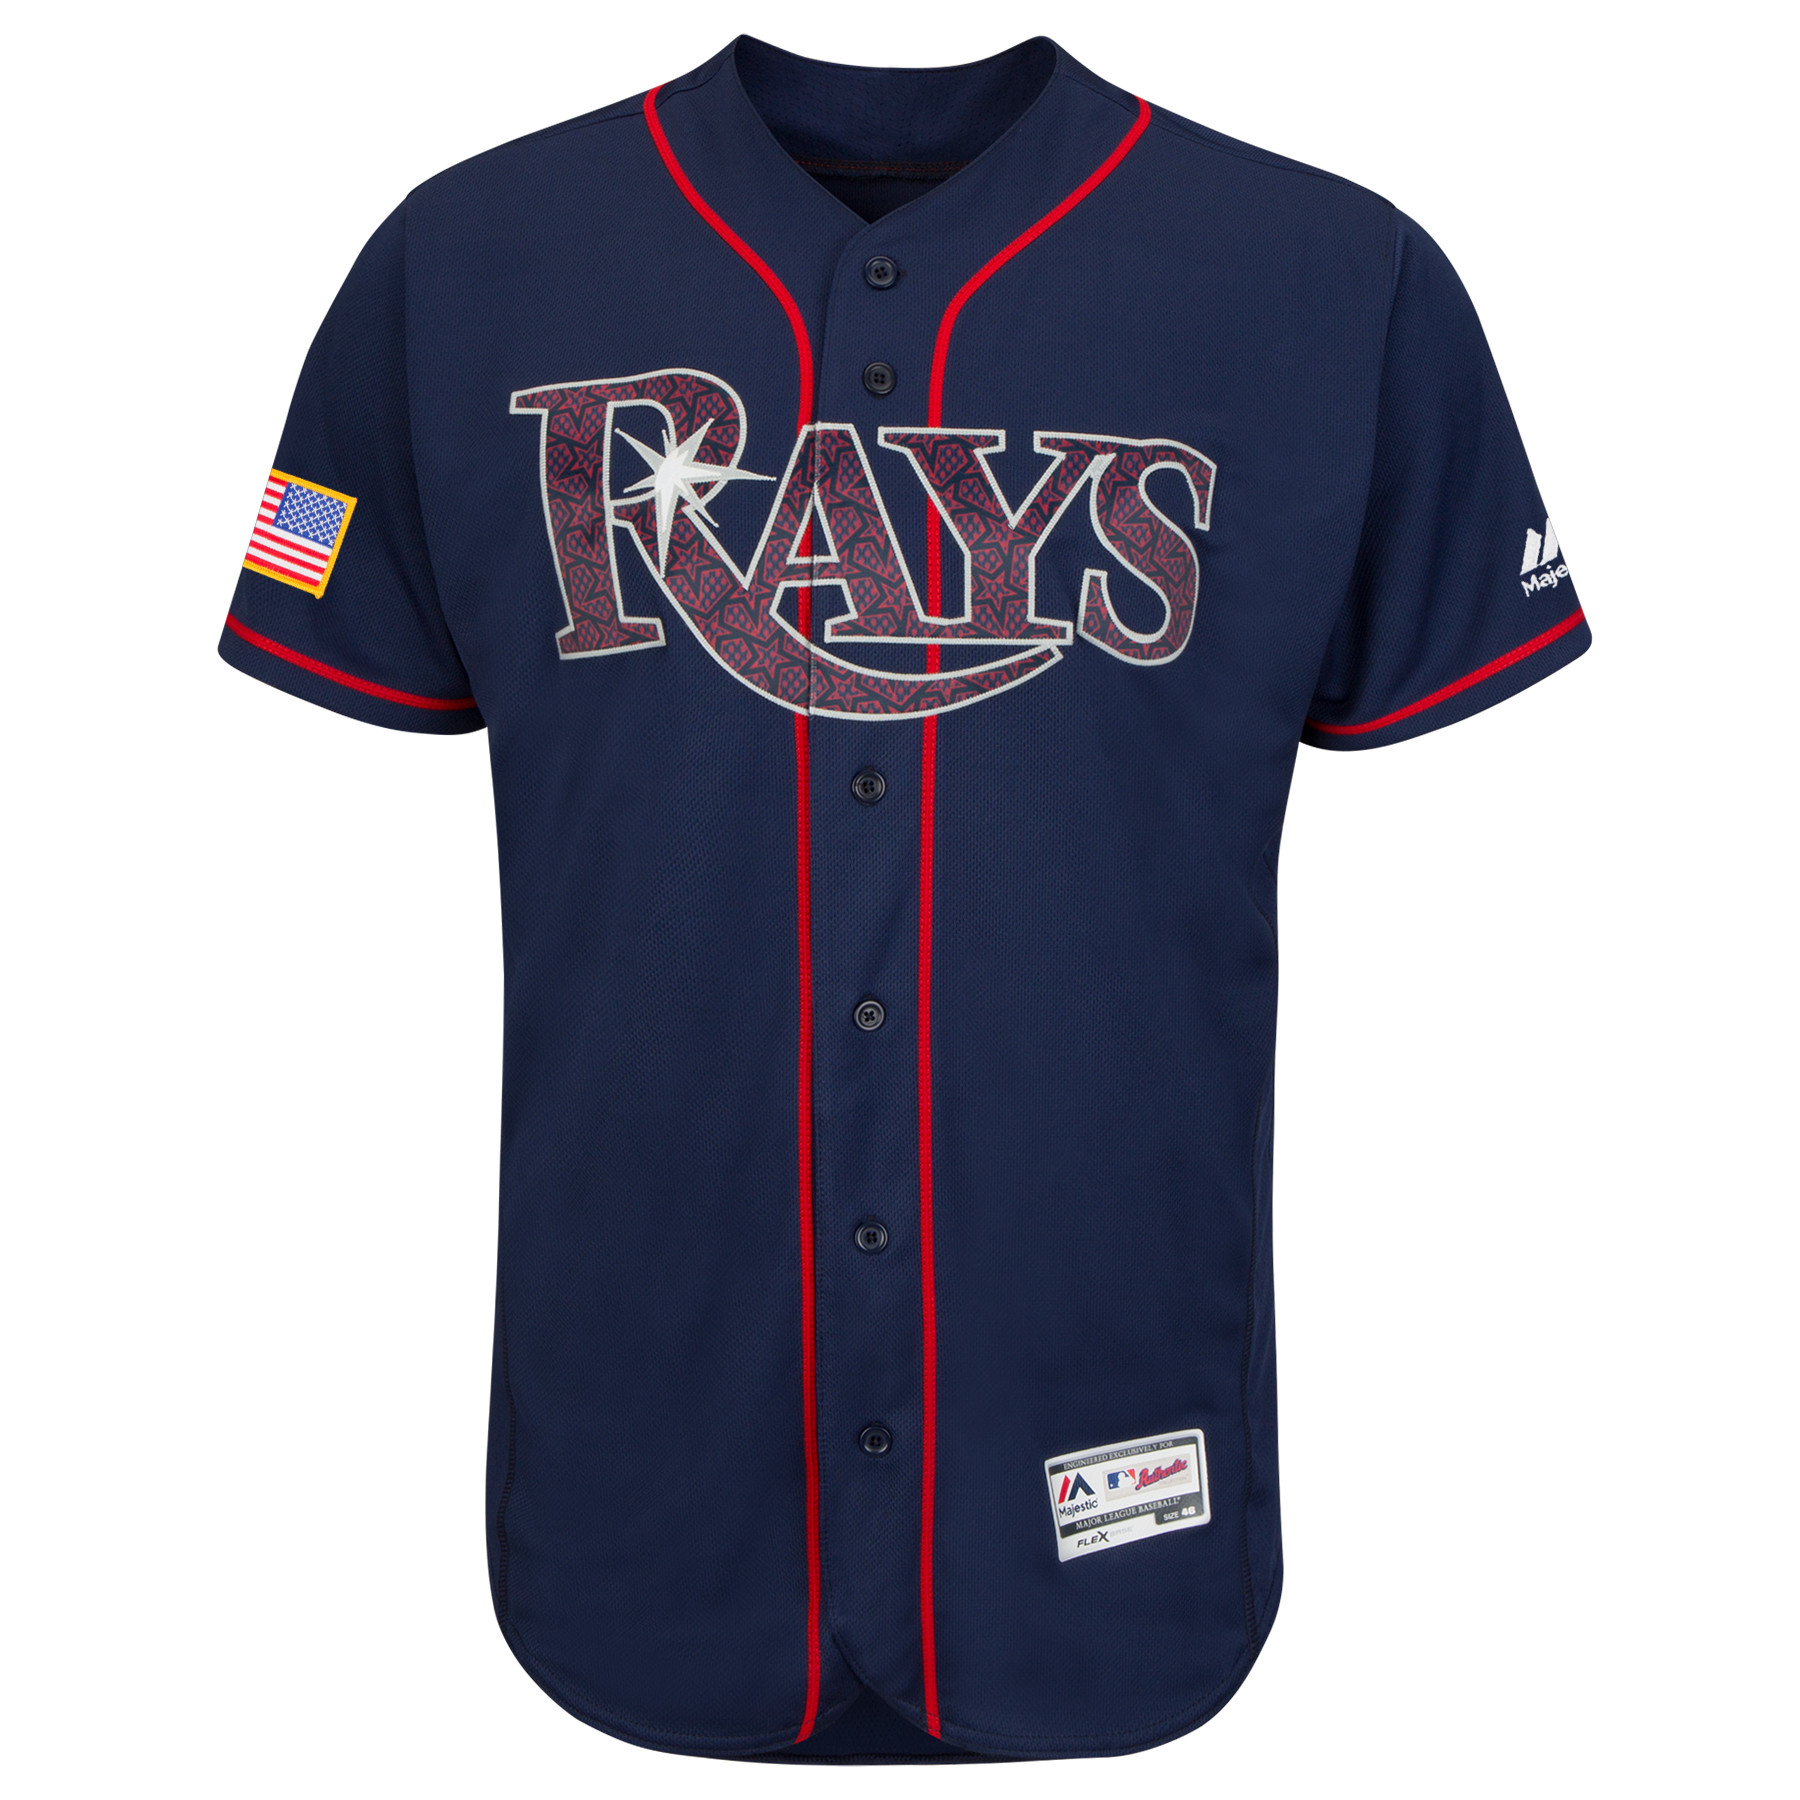 MLB releases 2016 special event jerseys and caps - Pinstripe Alley